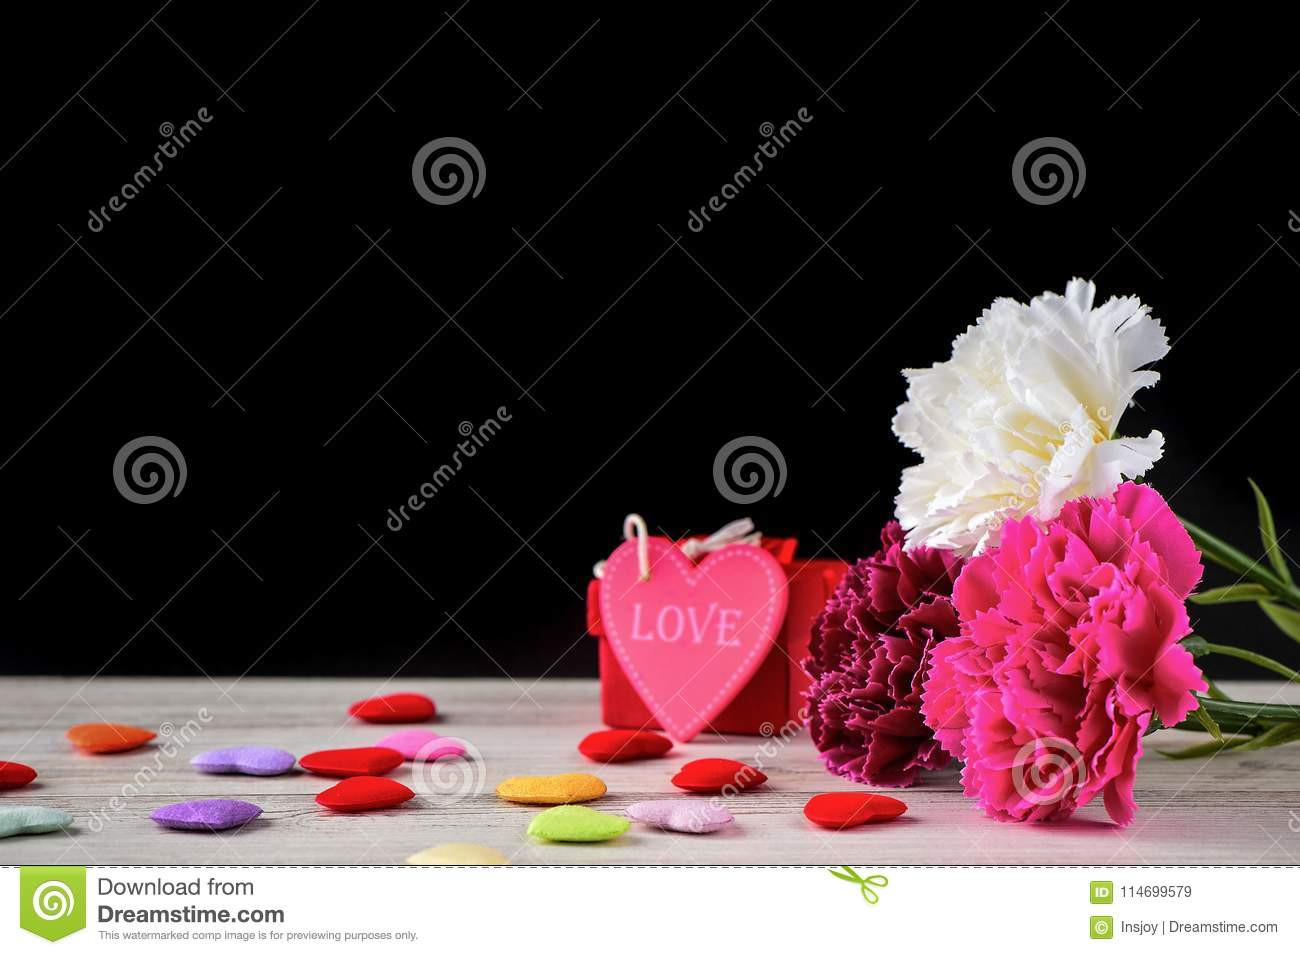 19 Nice Carnation Arrangements In Vase 2024 free download carnation arrangements in vase of may mothers day carnation bunch of flowers bouquet with heart and with regard to may mothers day carnation bunch of flowers bouquet with heart and gift blan